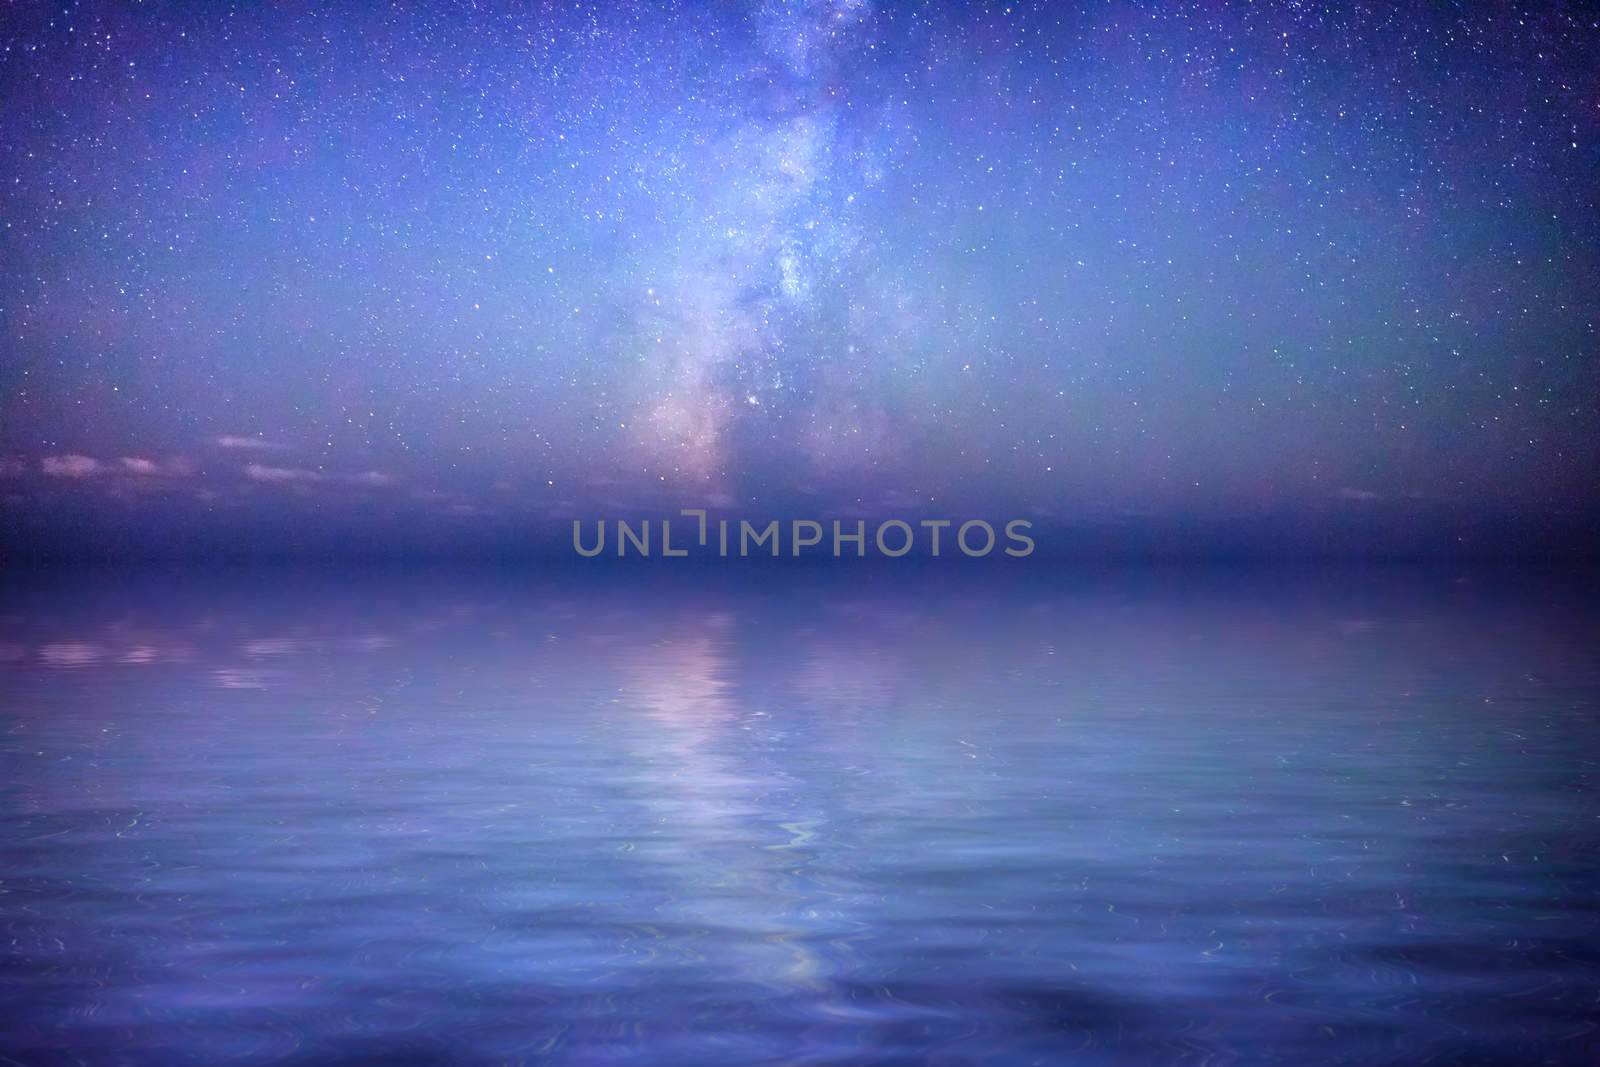 Milky Way Reflection by PhotoWorks